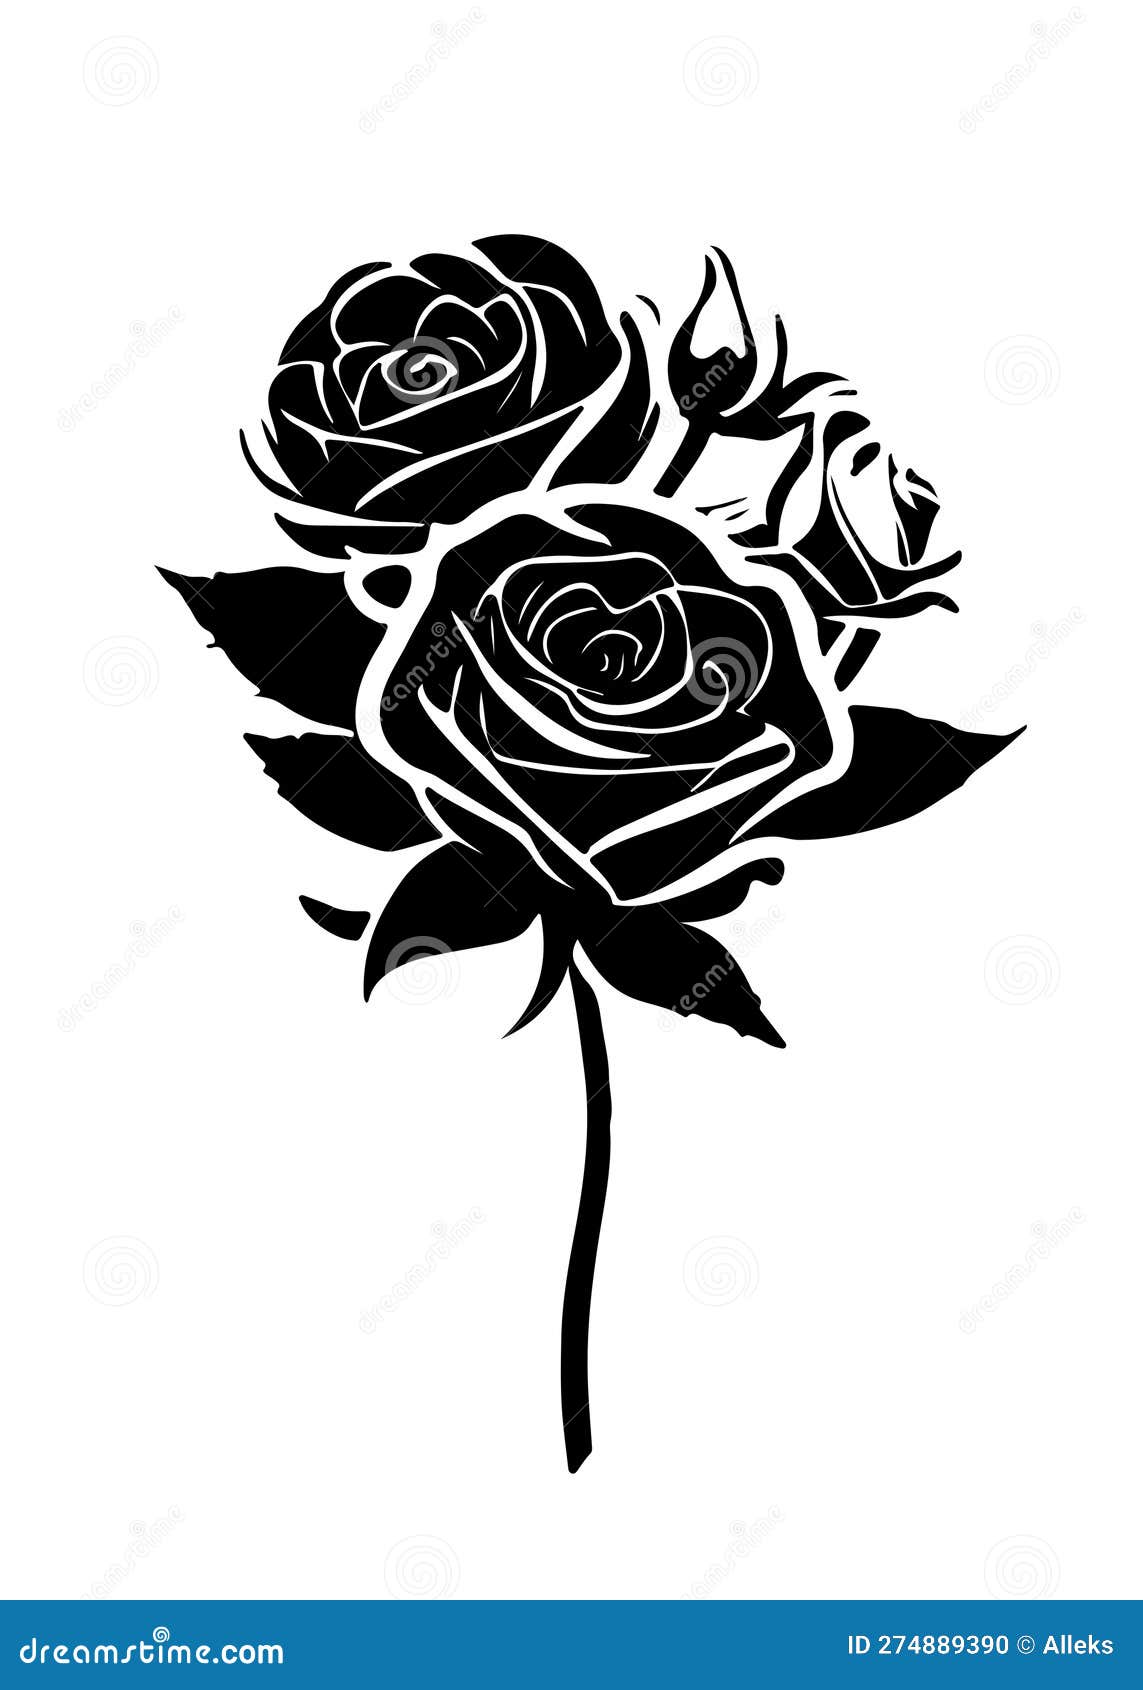 Pin by C S on Inkspiration  Single rose tattoos Black rose tattoos Rose  tattoo design